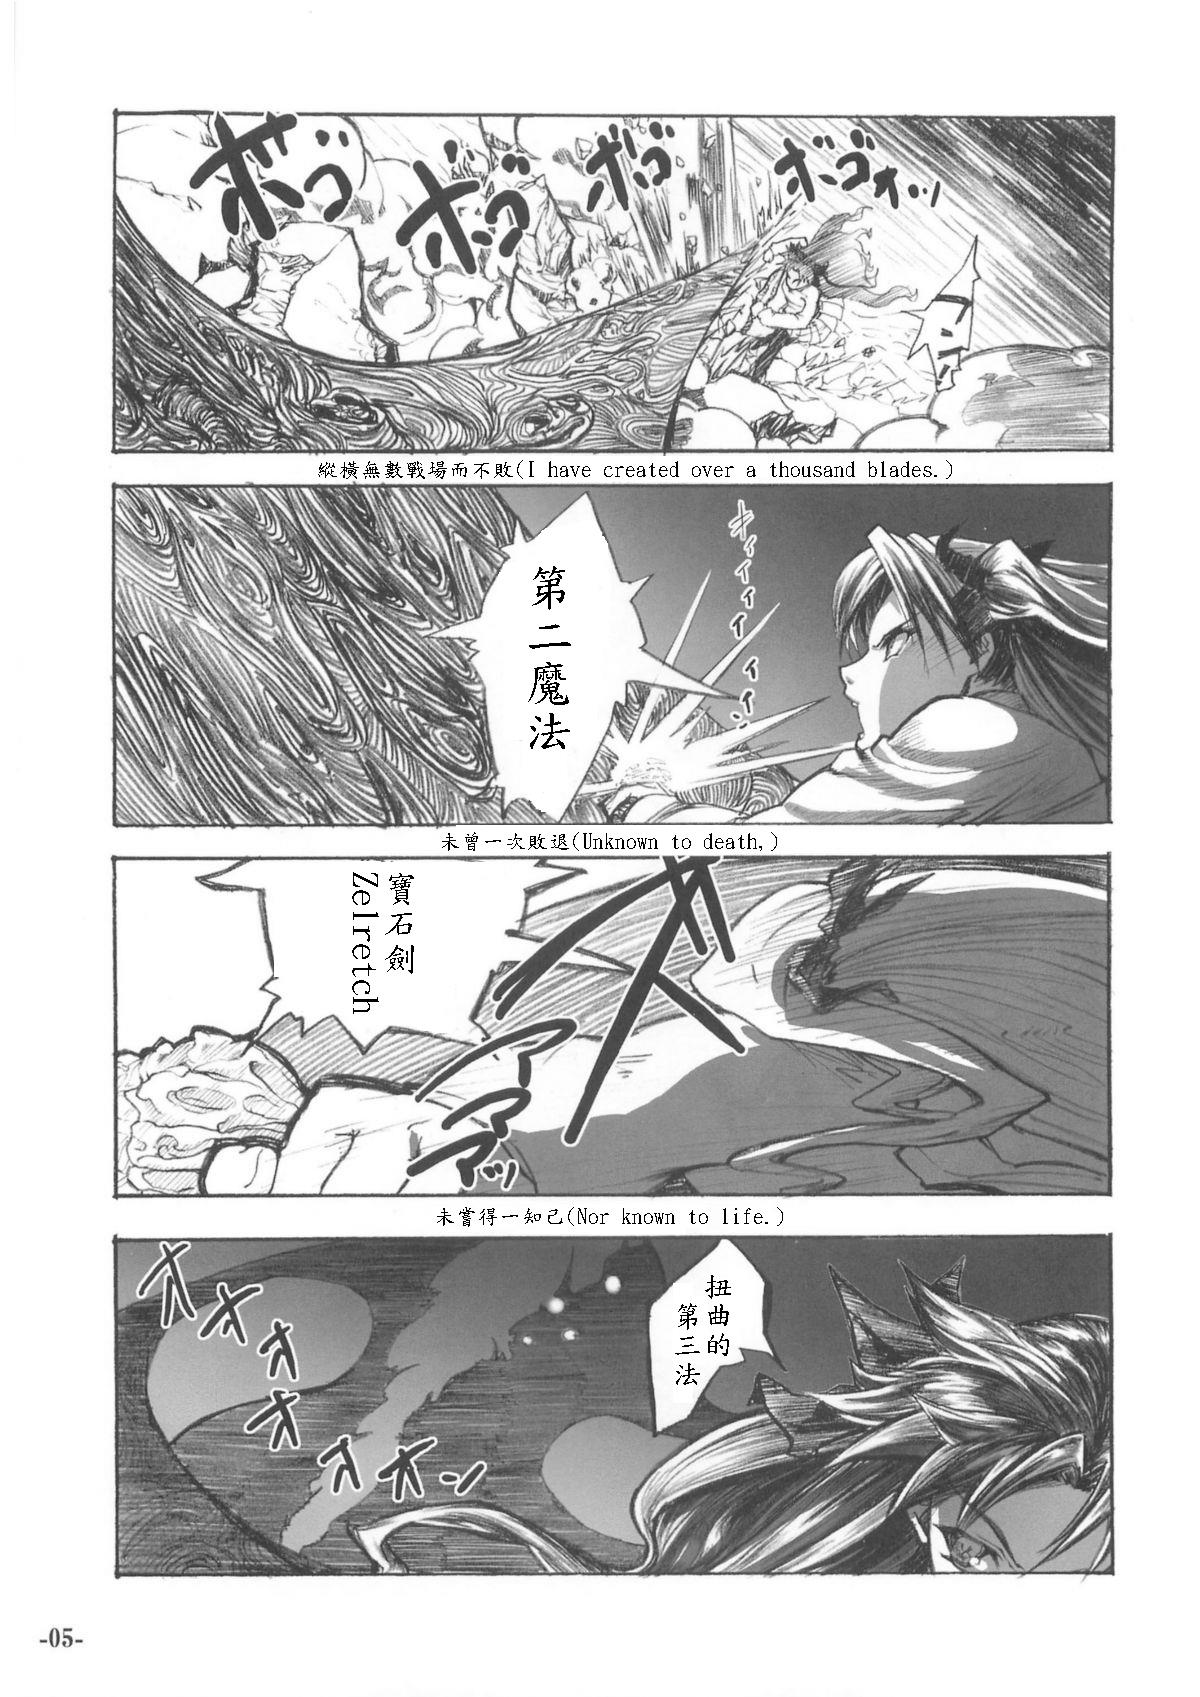 Fate/Final Fantasy (fate/stay night) (chinese)(xxx混合) page 5 full